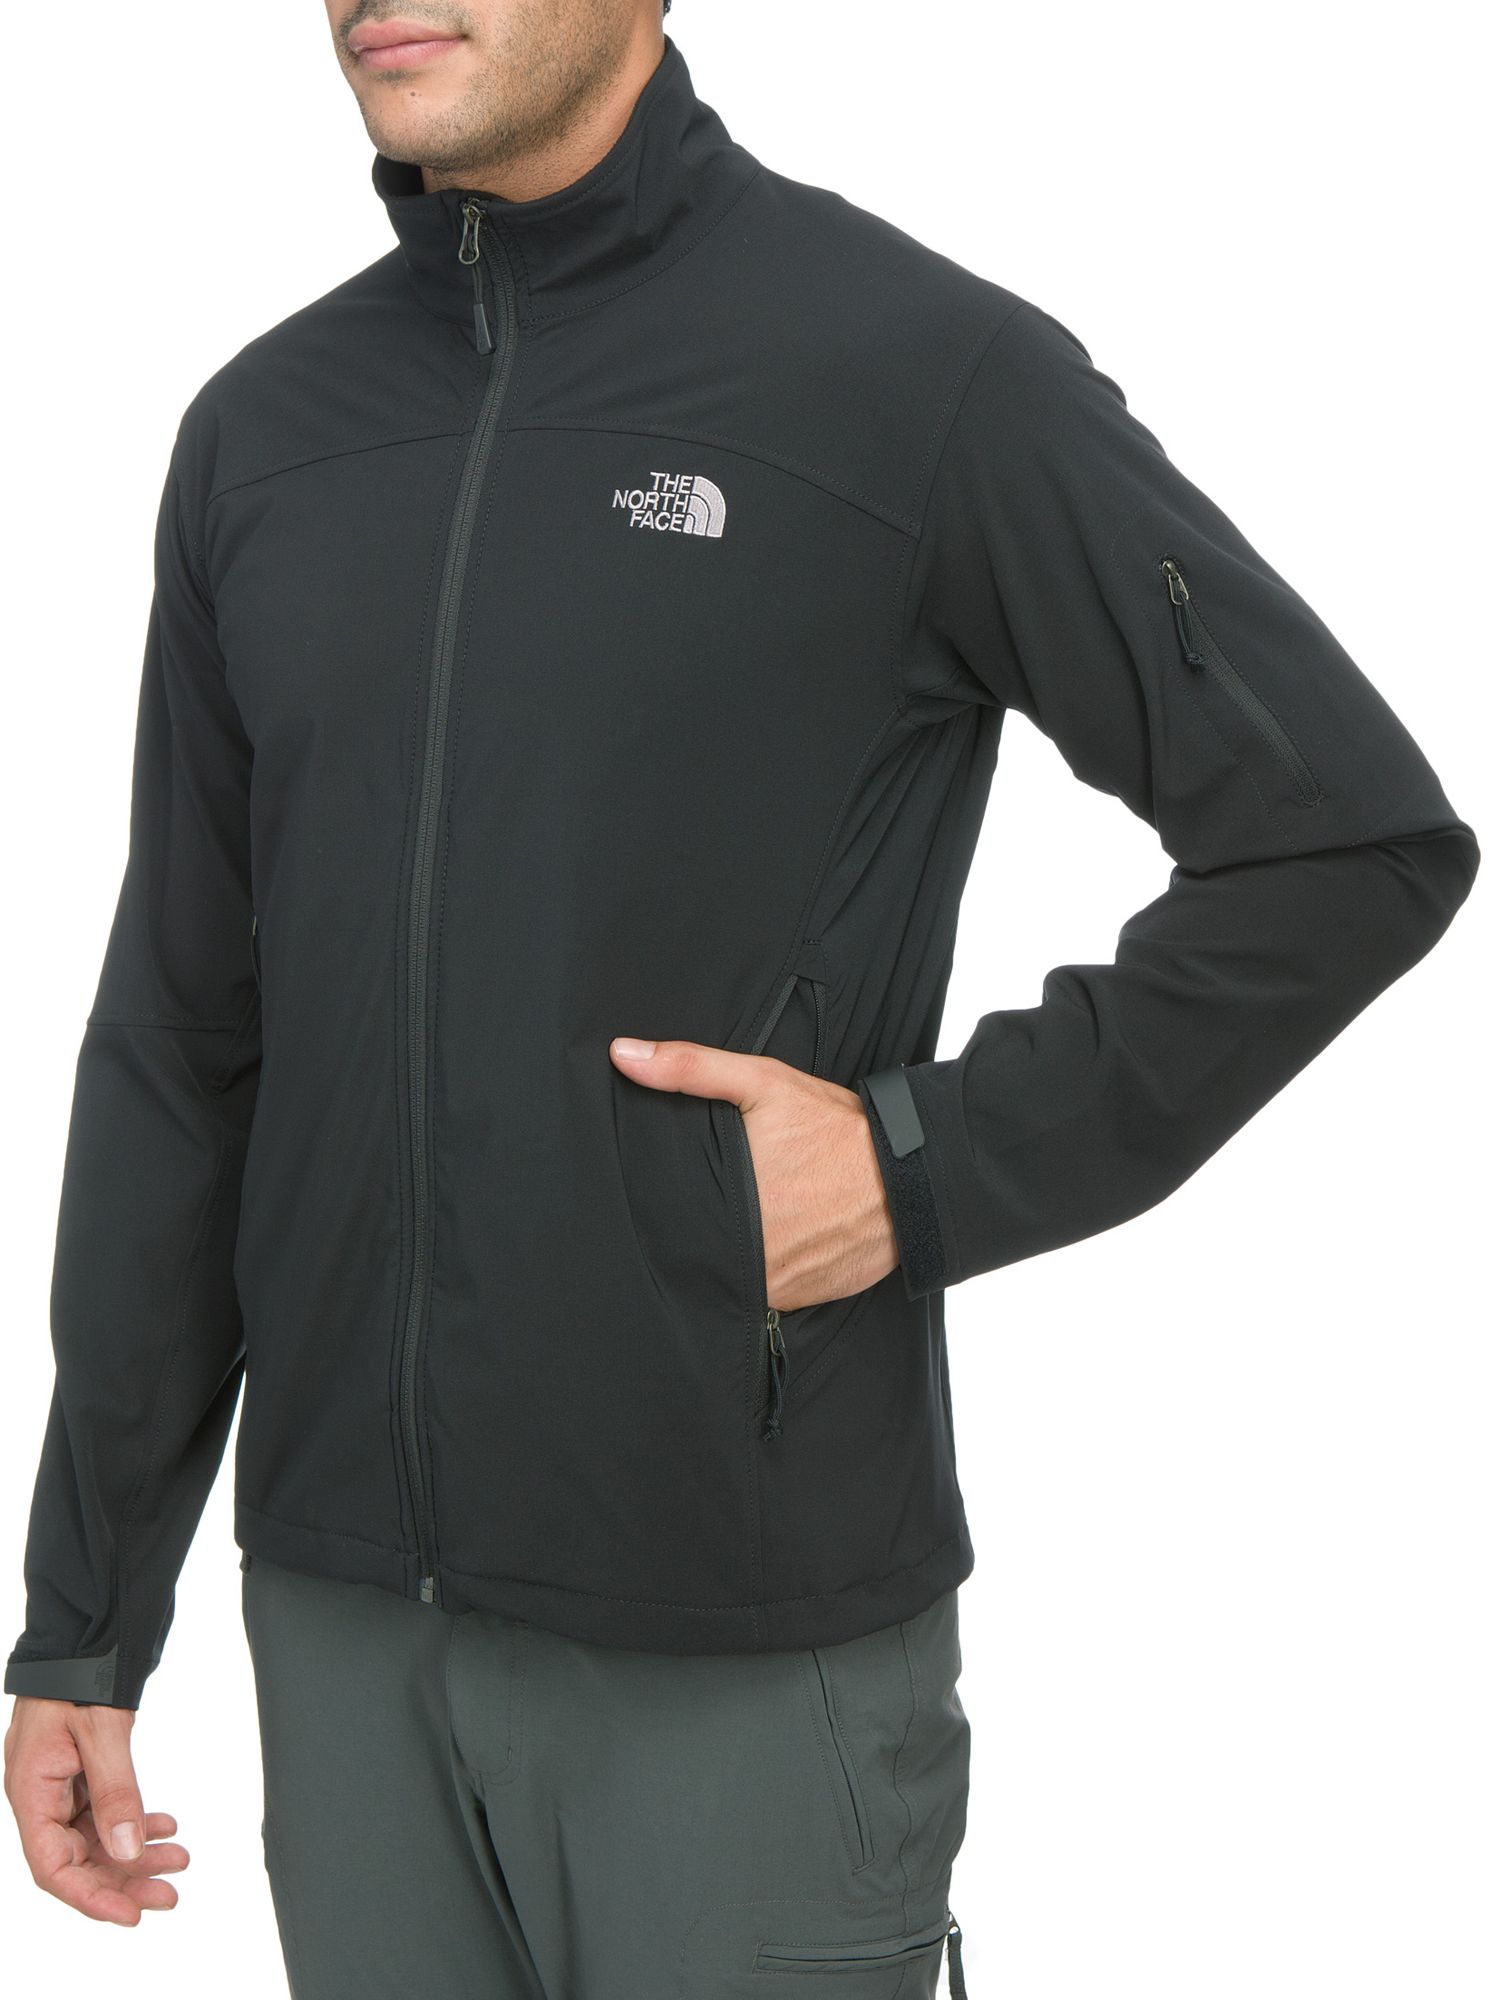 the north face ceresio jacket Online 